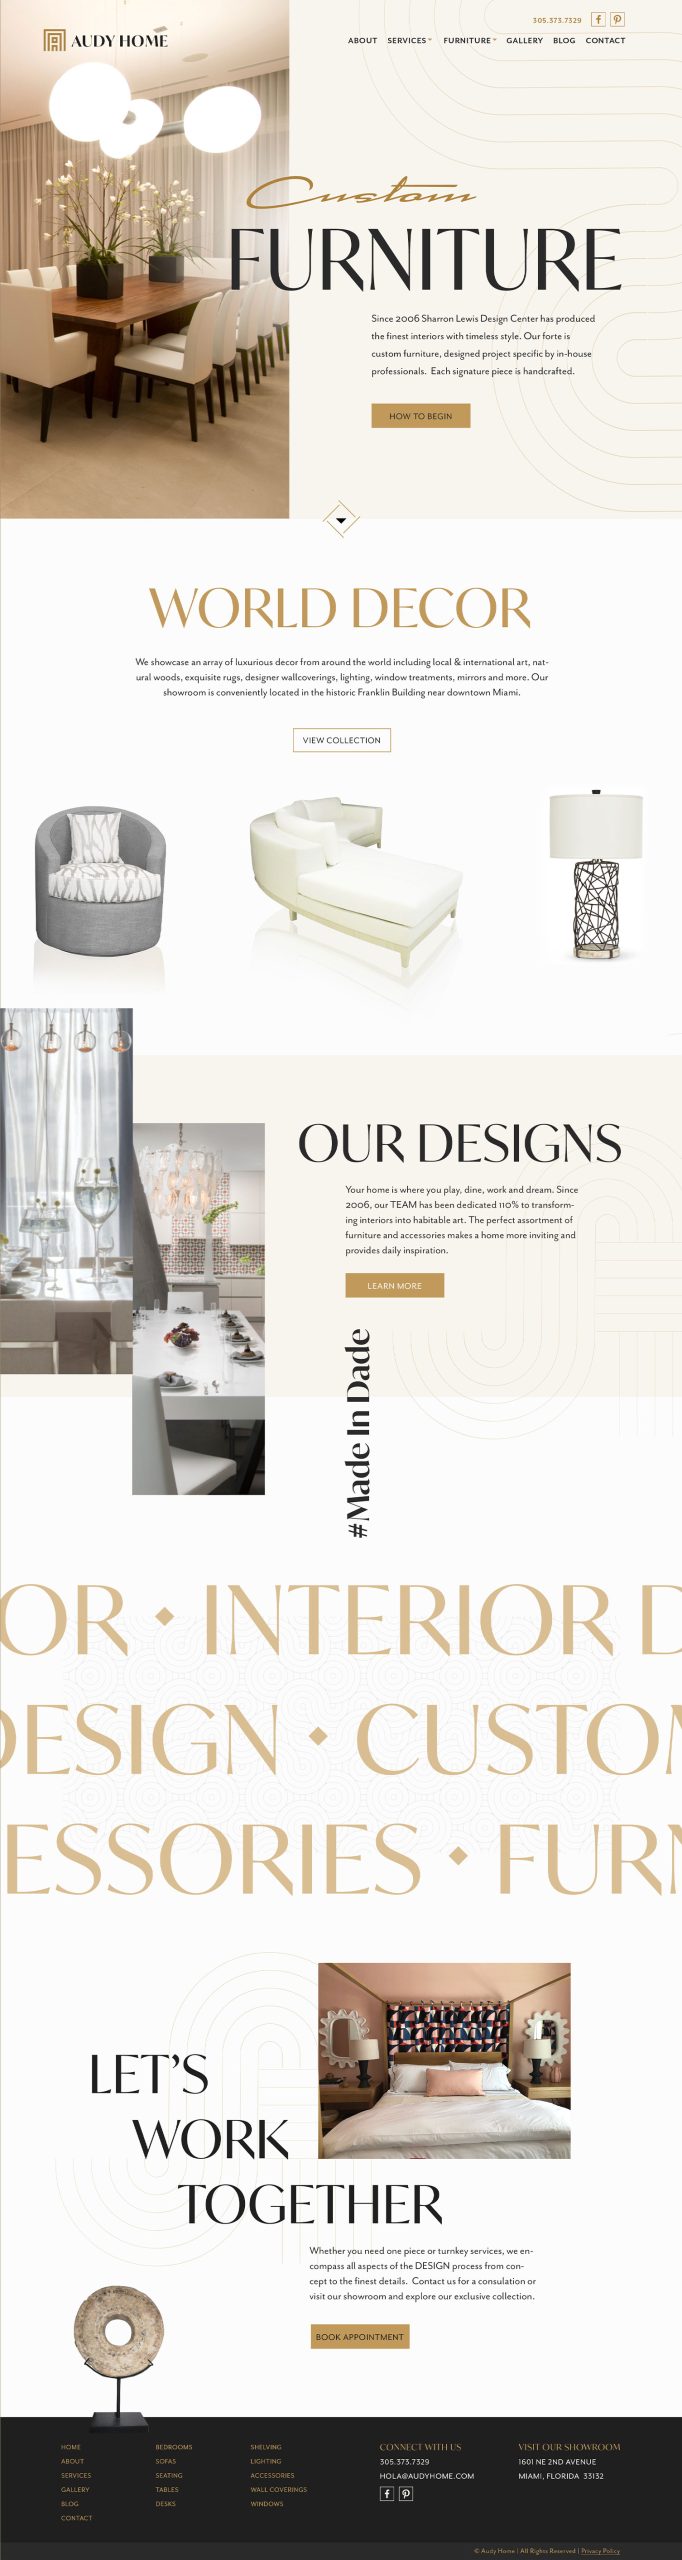 Audy Home, home page website design by Blenderhouse Creative